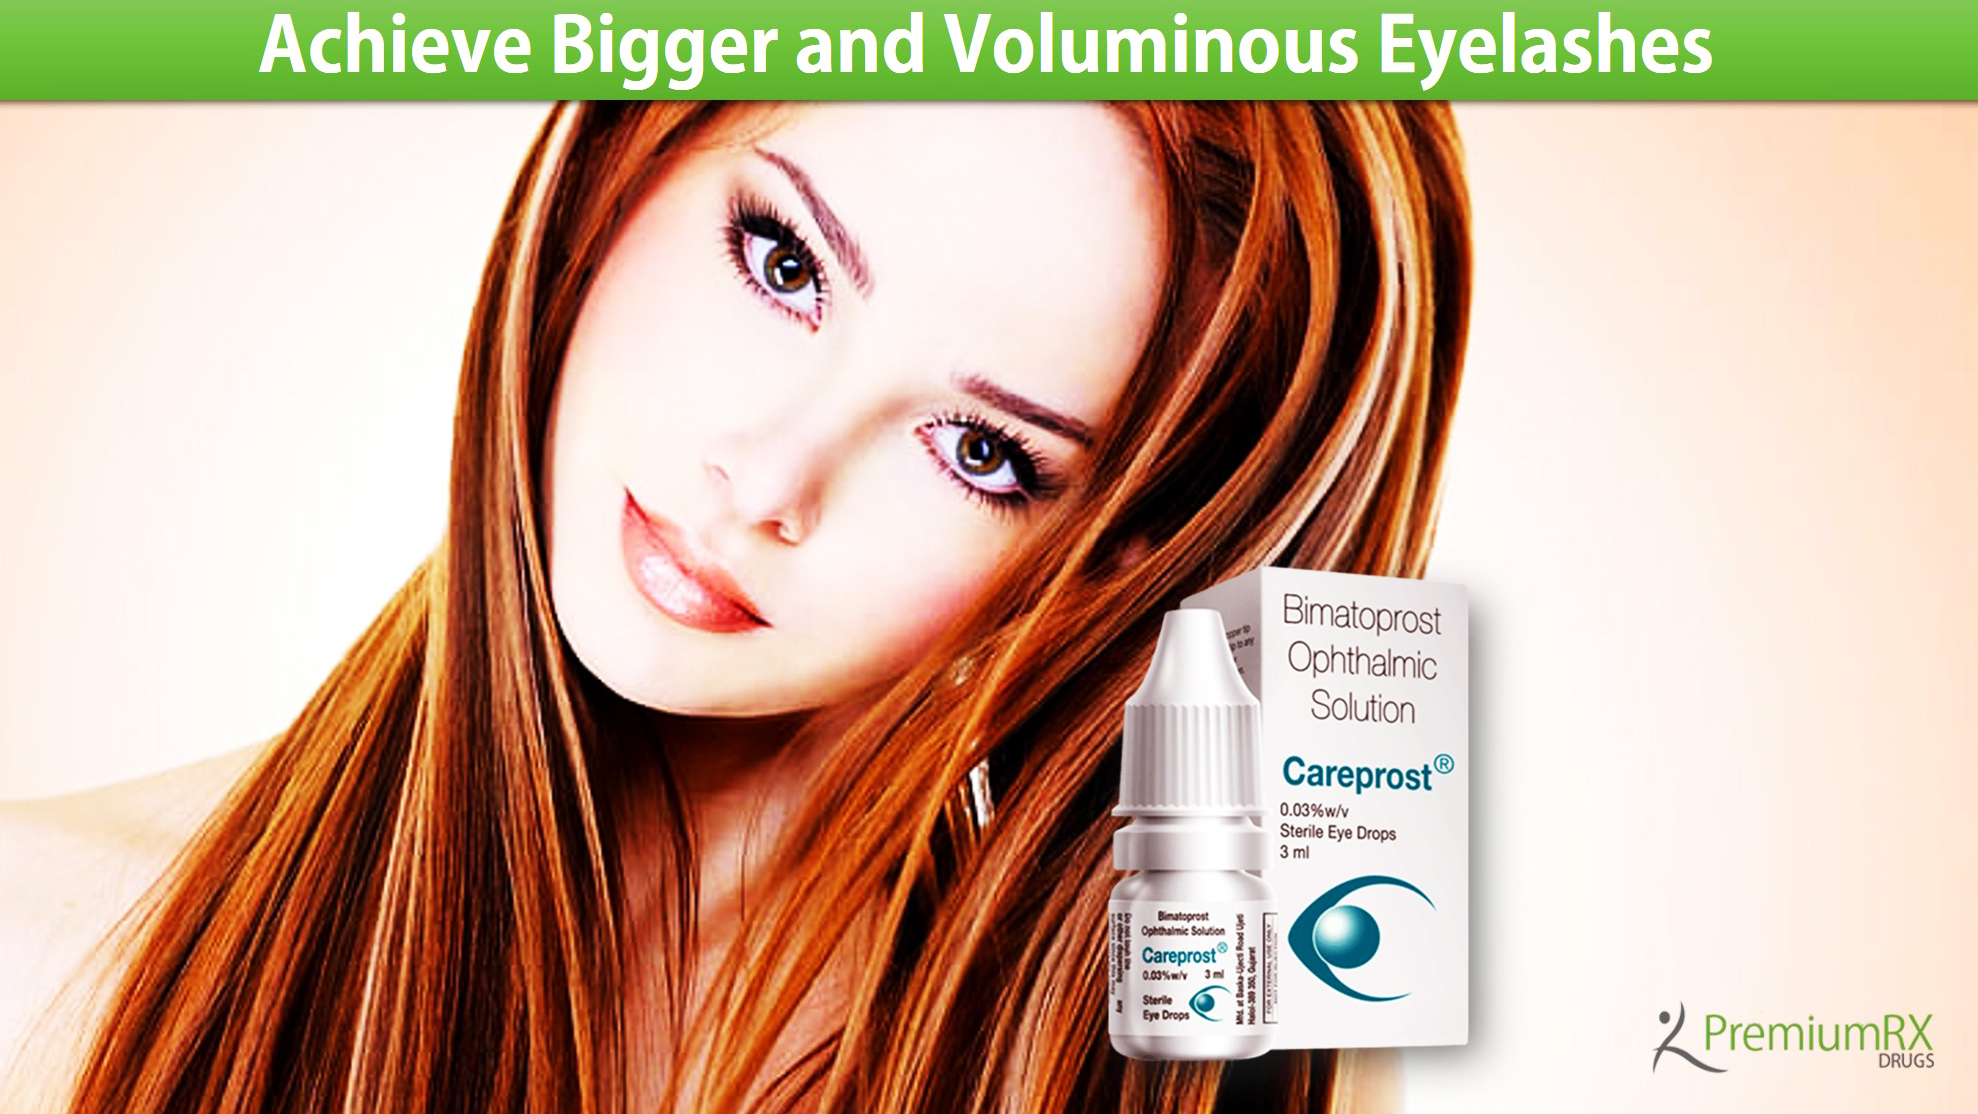 Where you can purchase Careprost Eye Drop